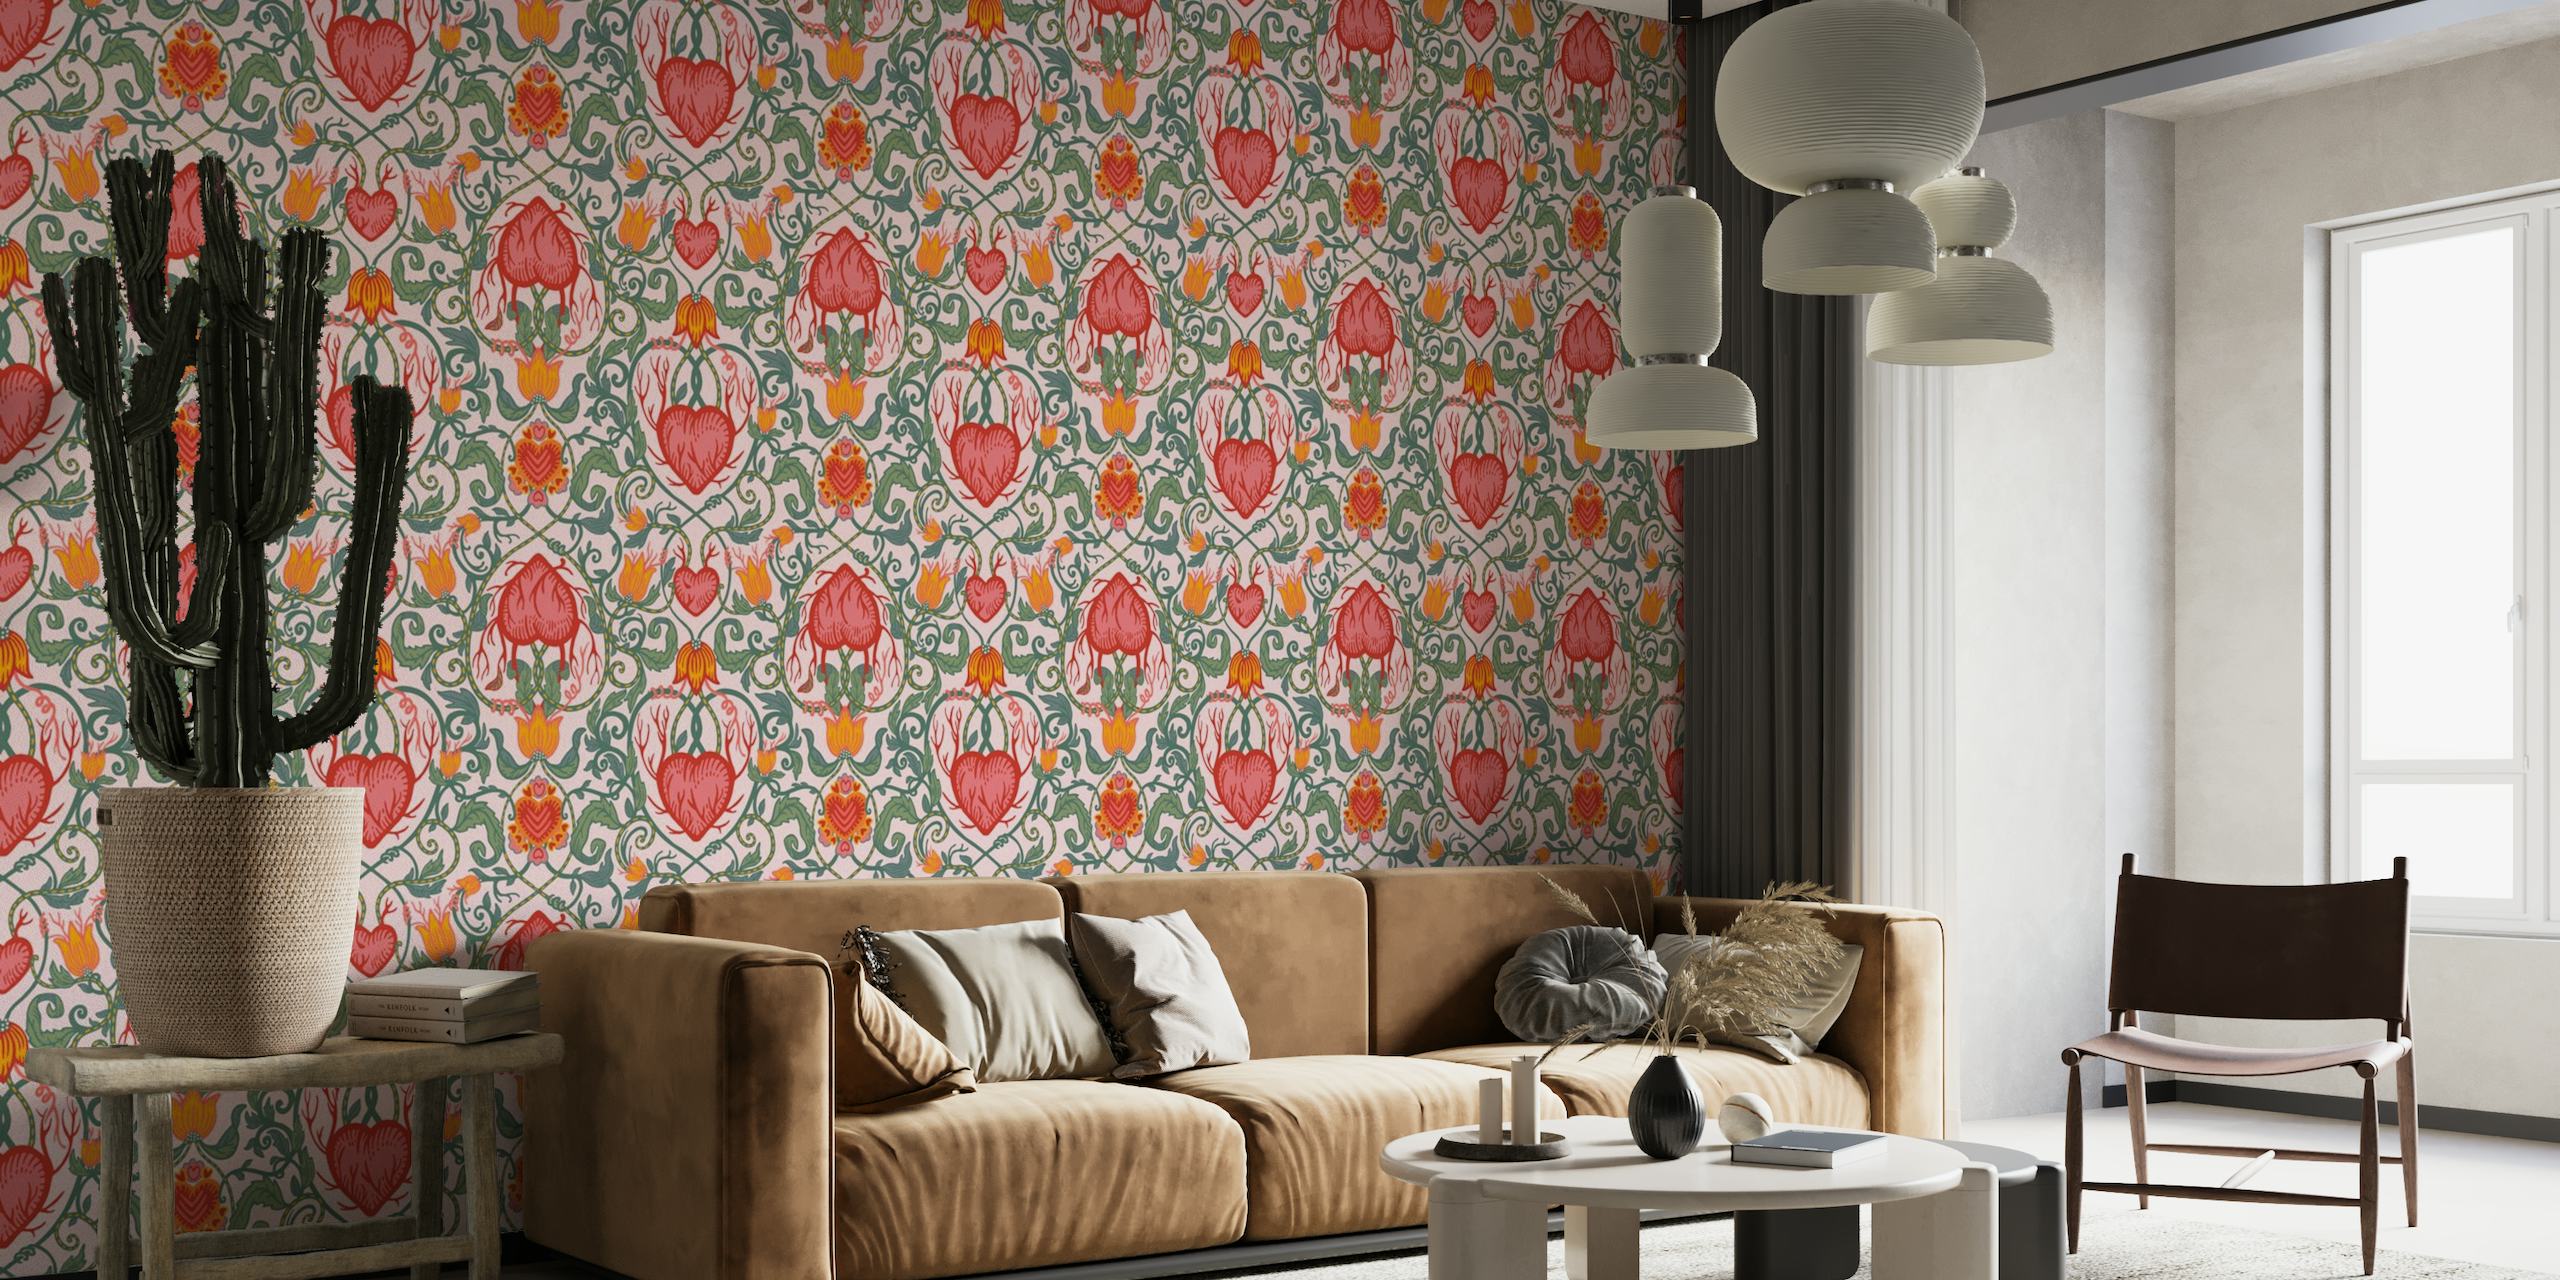 Victorian-style wall mural with valentines hearts and floral patterns